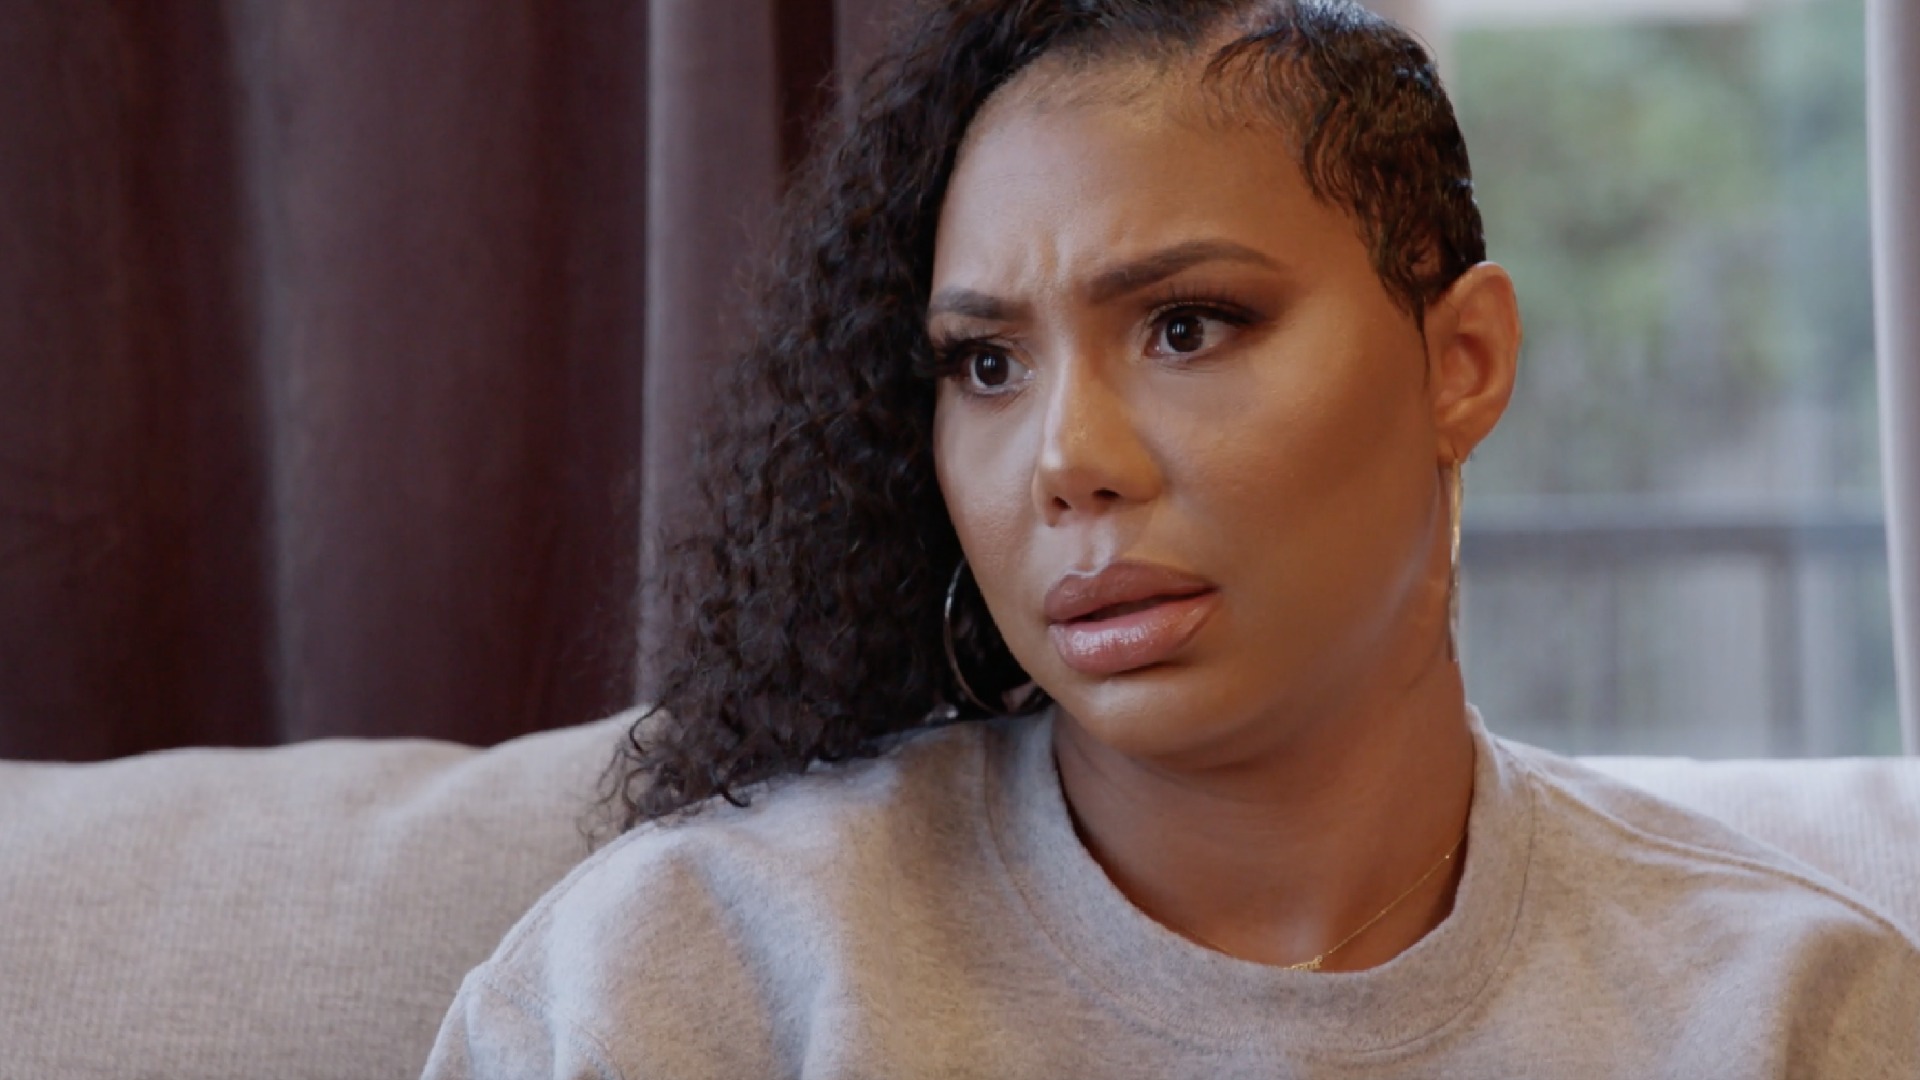 Watch Sneak Peek: Old and New Wounds | Tamar Braxton: Get Ya Life! Video Extras